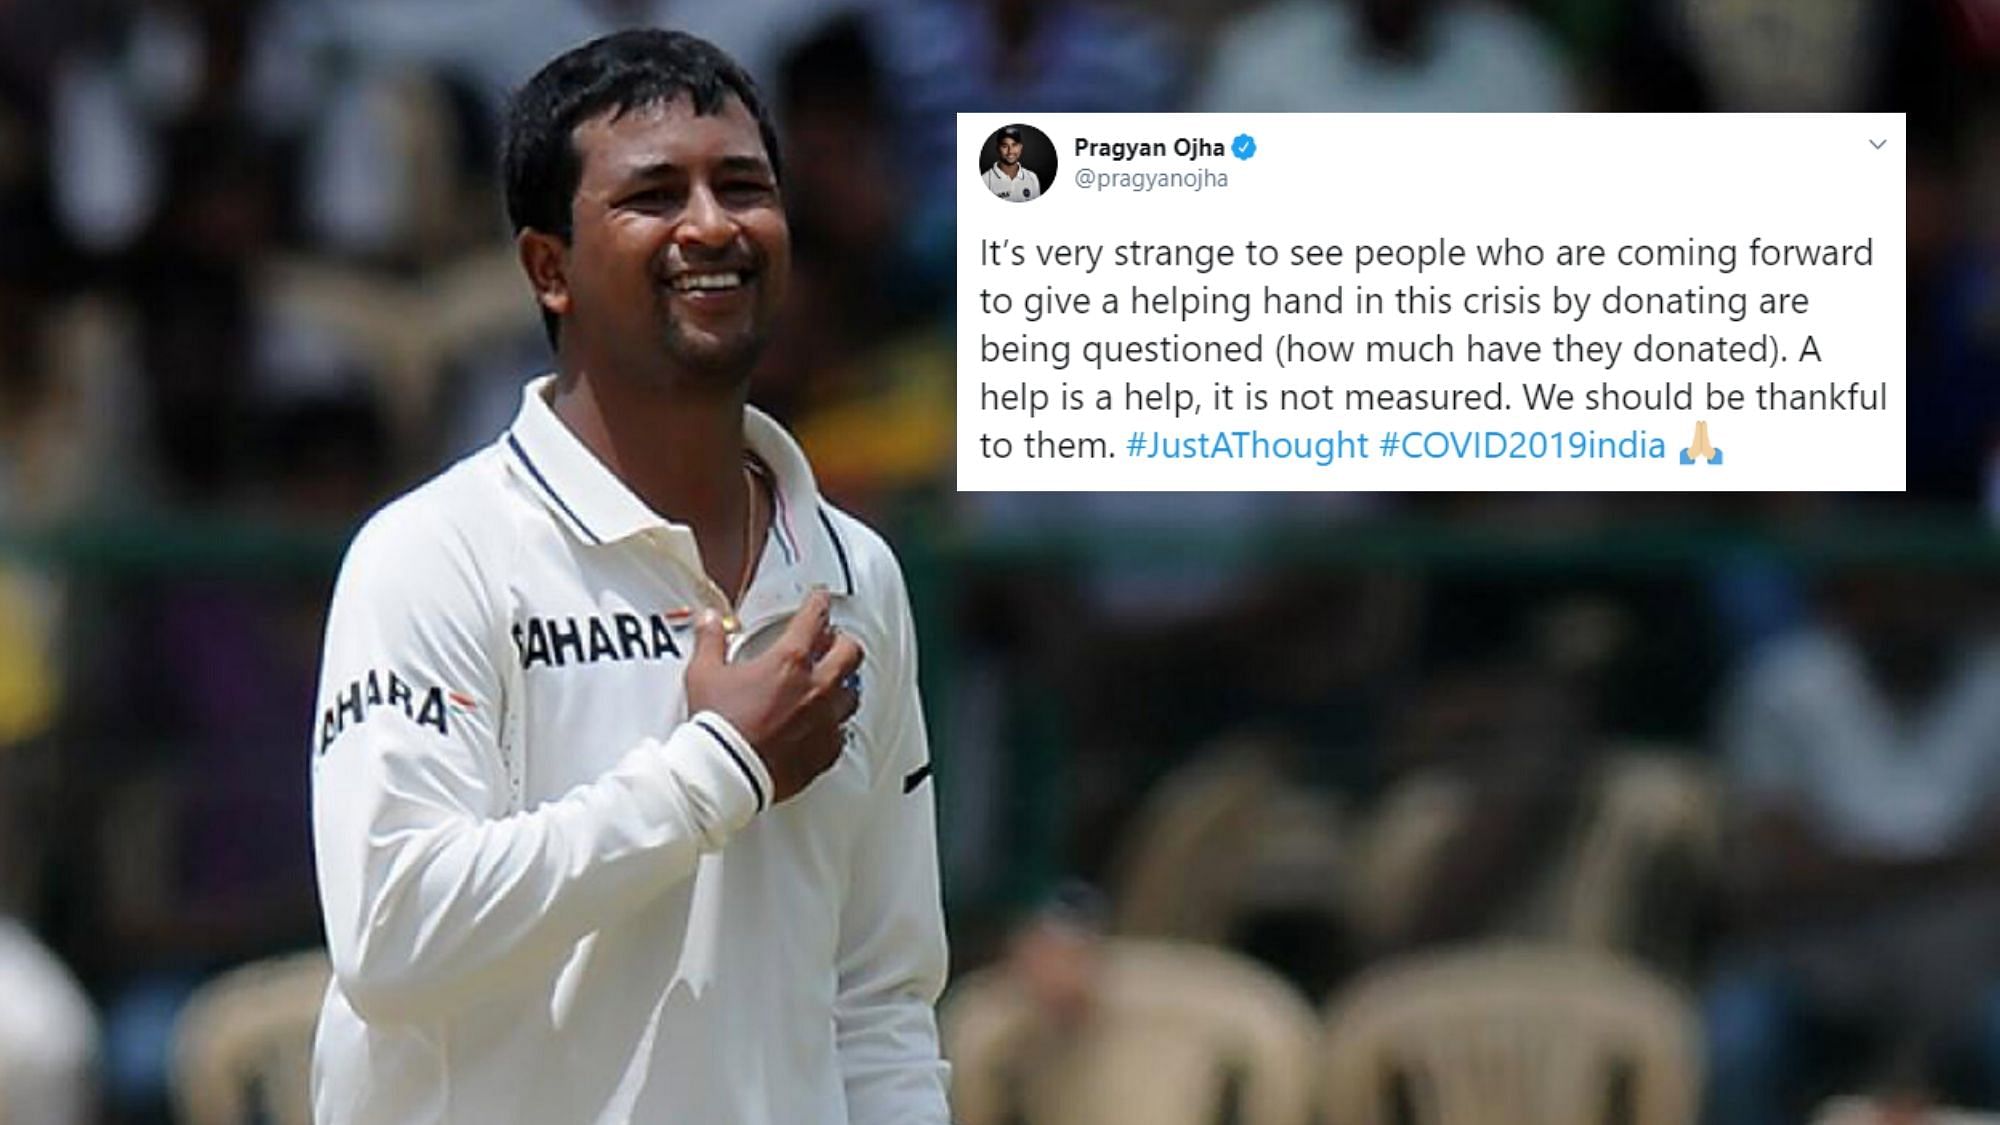 Pragyan Ojha has retired from all forms of cricket in February 2020.